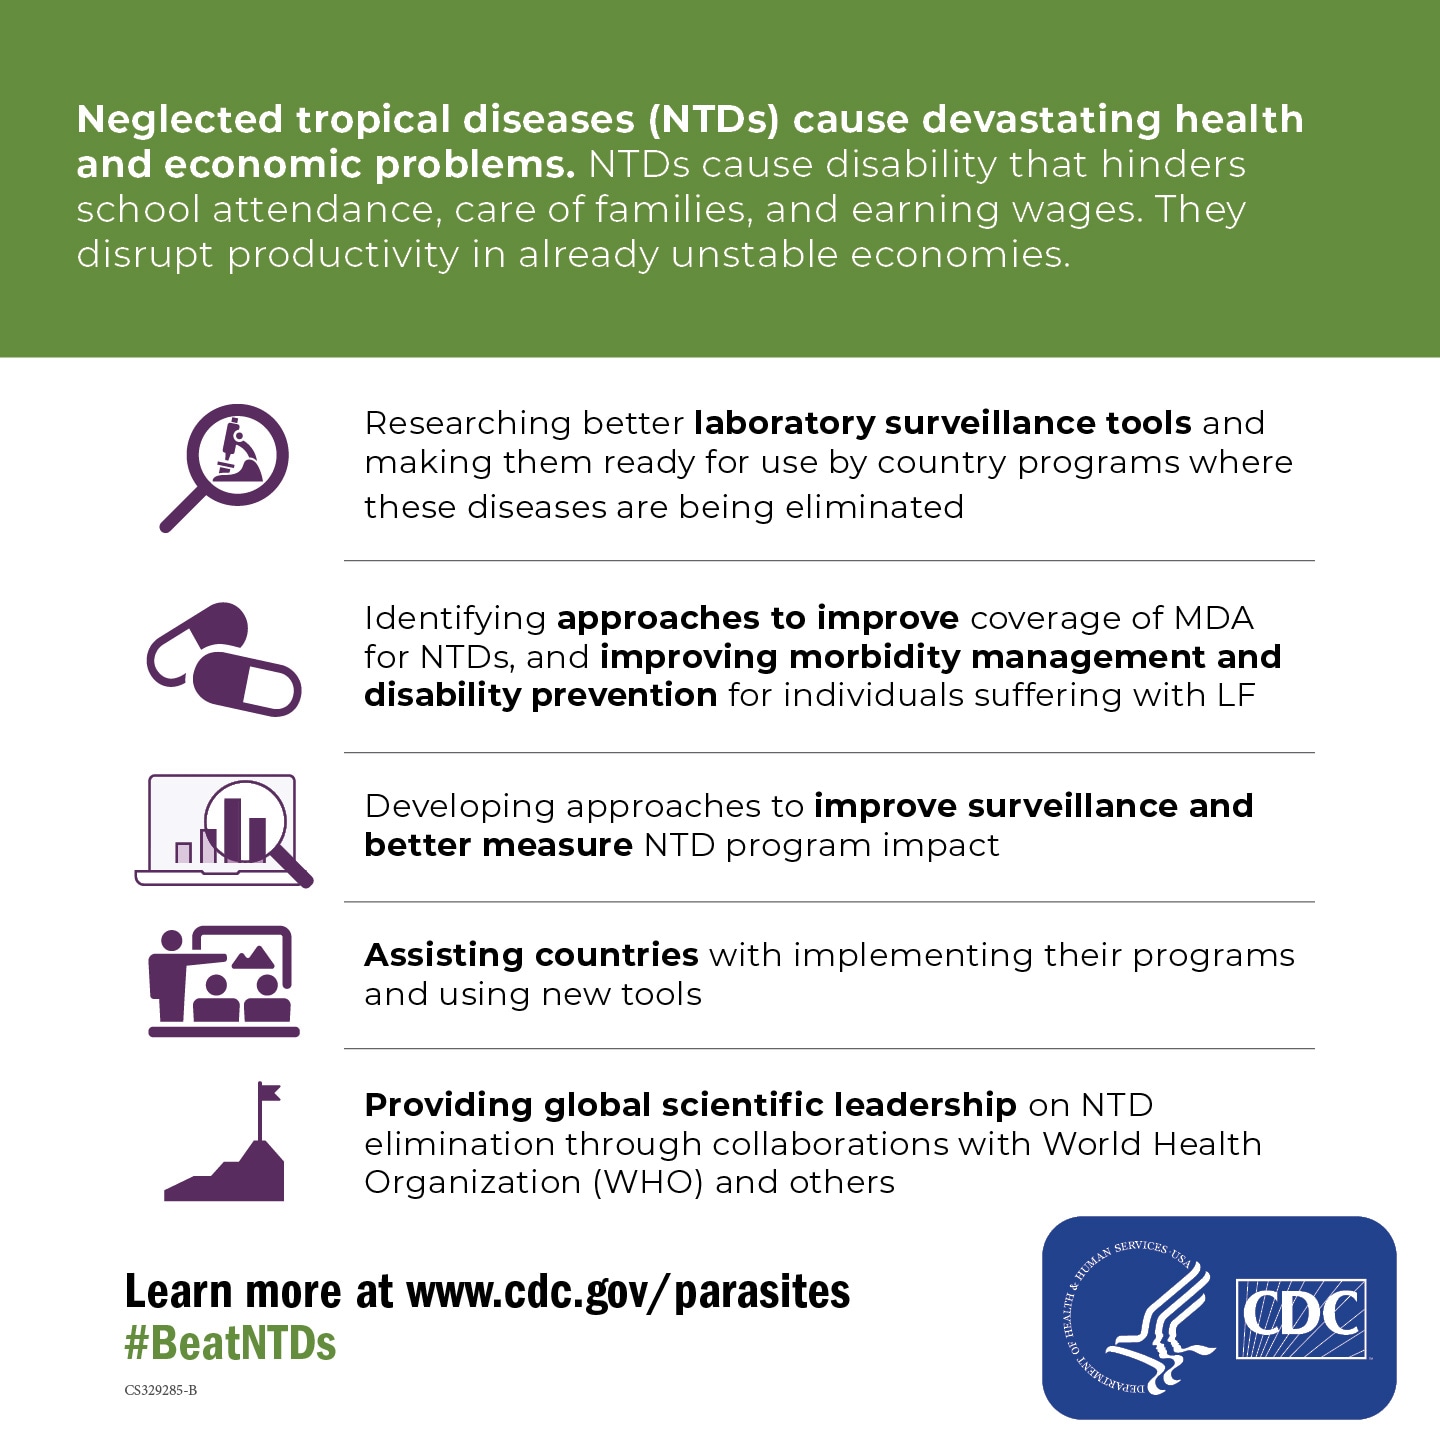 Neglected tropical diseases (NTDs) cause devastating health and economic problems for the world’s poorest people, maintaining a cycle of poverty and disease.